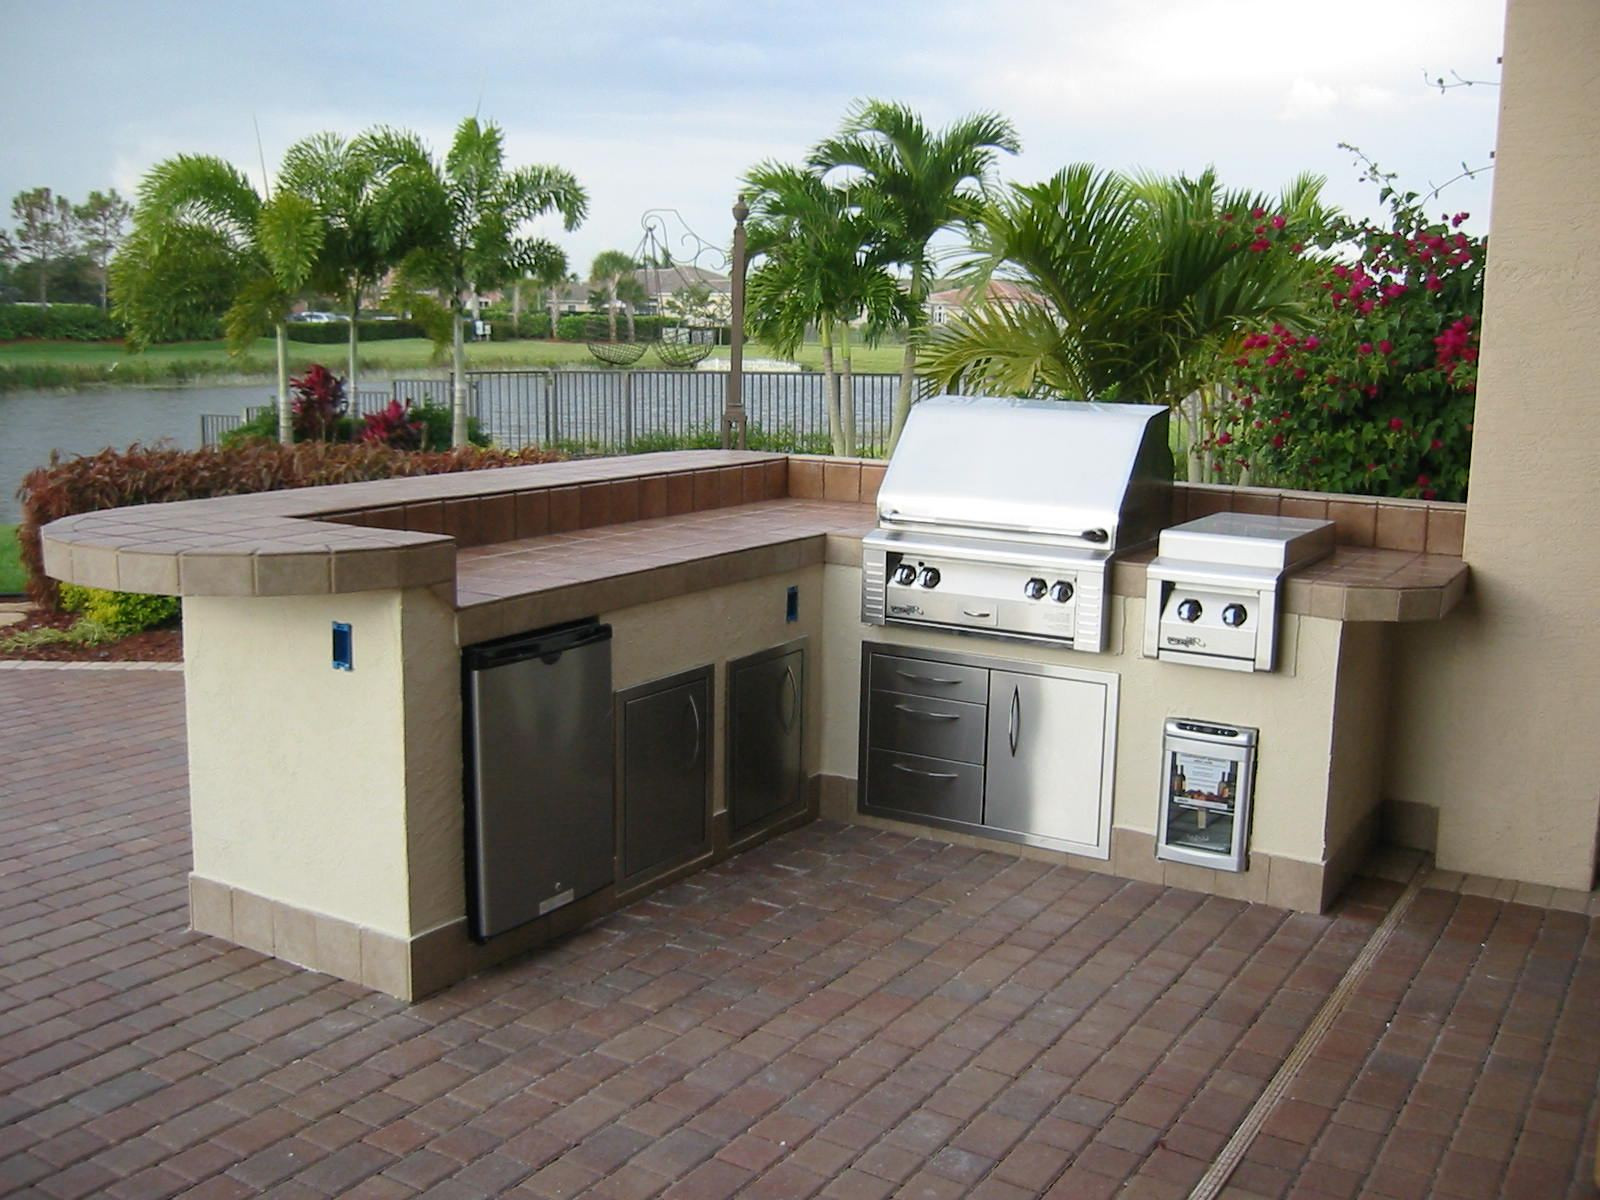 Outdoor Kitchen Kit Lowes
 35 Ideas about Prefab Outdoor Kitchen Kits TheyDesign